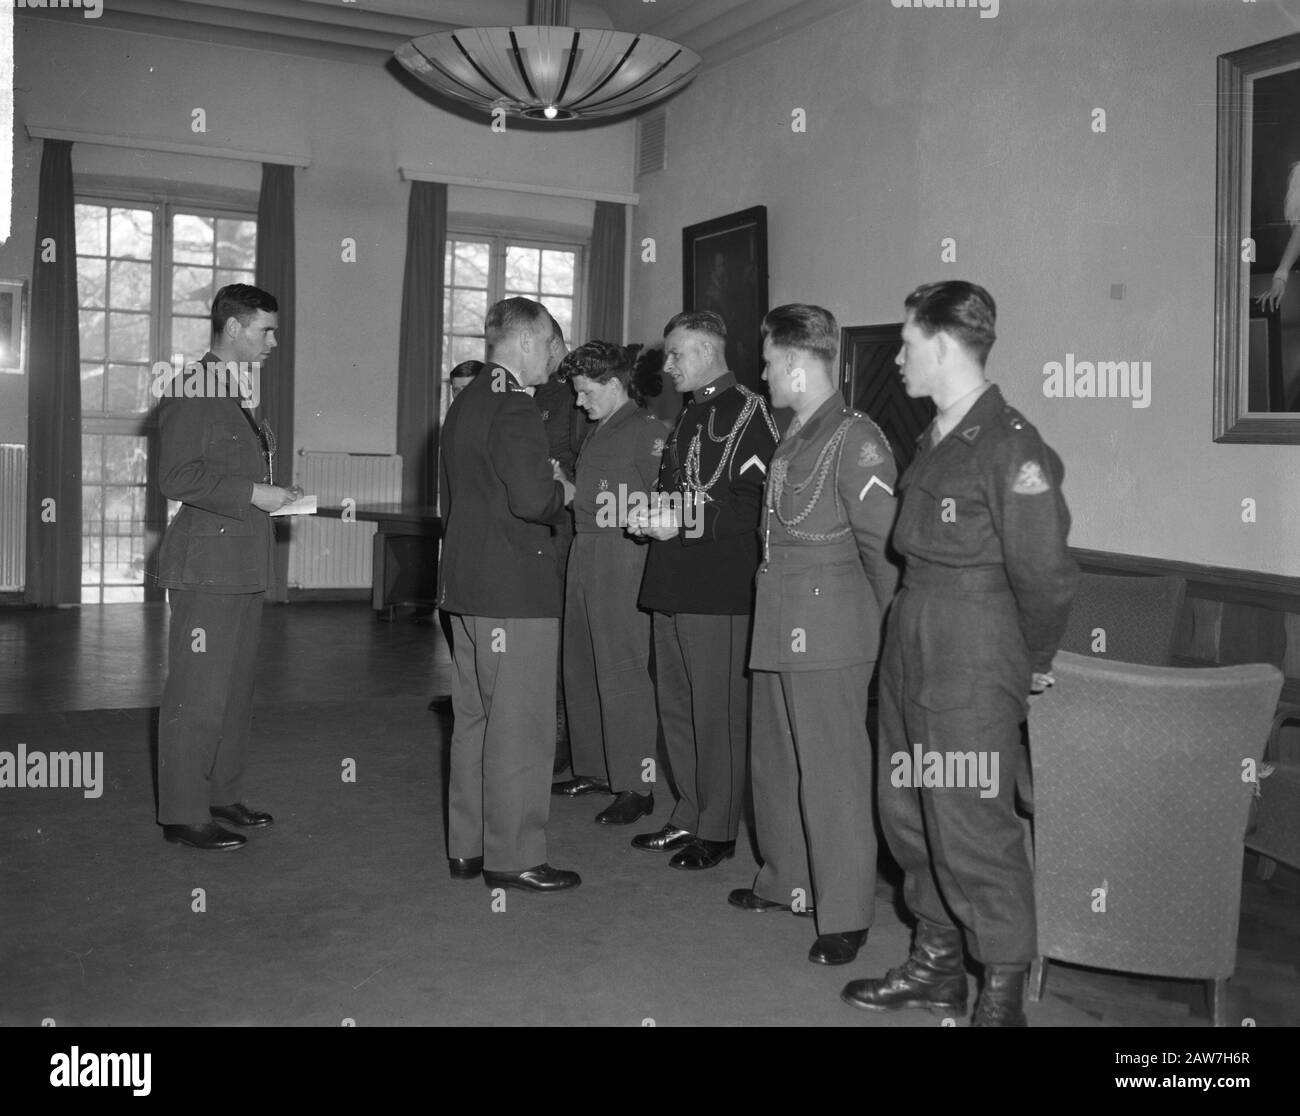 Lieutenant-General AV van den Wall, medal awarded to soldiers who Elfstedentocht rode in Princess Juliana Barracks in The Hague Date: January 24, 1963 Location: The Hague, South Holland Keywords: MILITARY Person Name: AV van den Wall Stock Photo